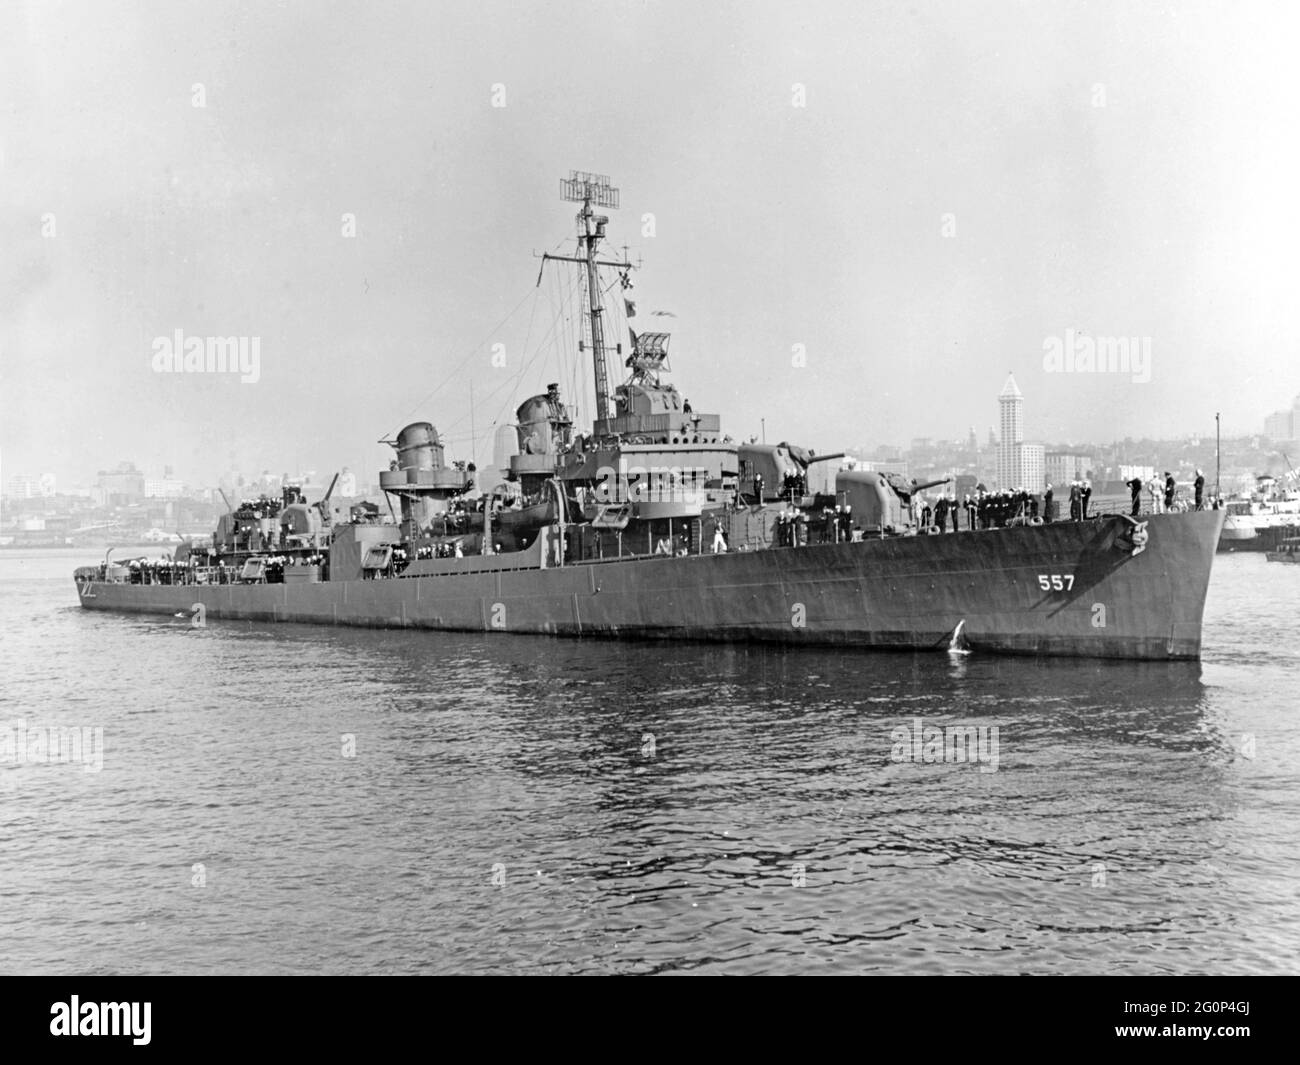 USS Johnston (DD-557) was a Fletcher-class destroyer in the service of the United States Navy in World War II, the first Navy ship named after Lieutenant John V. Johnston. The ship is known for her action in the Battle off Samar. Stock Photo